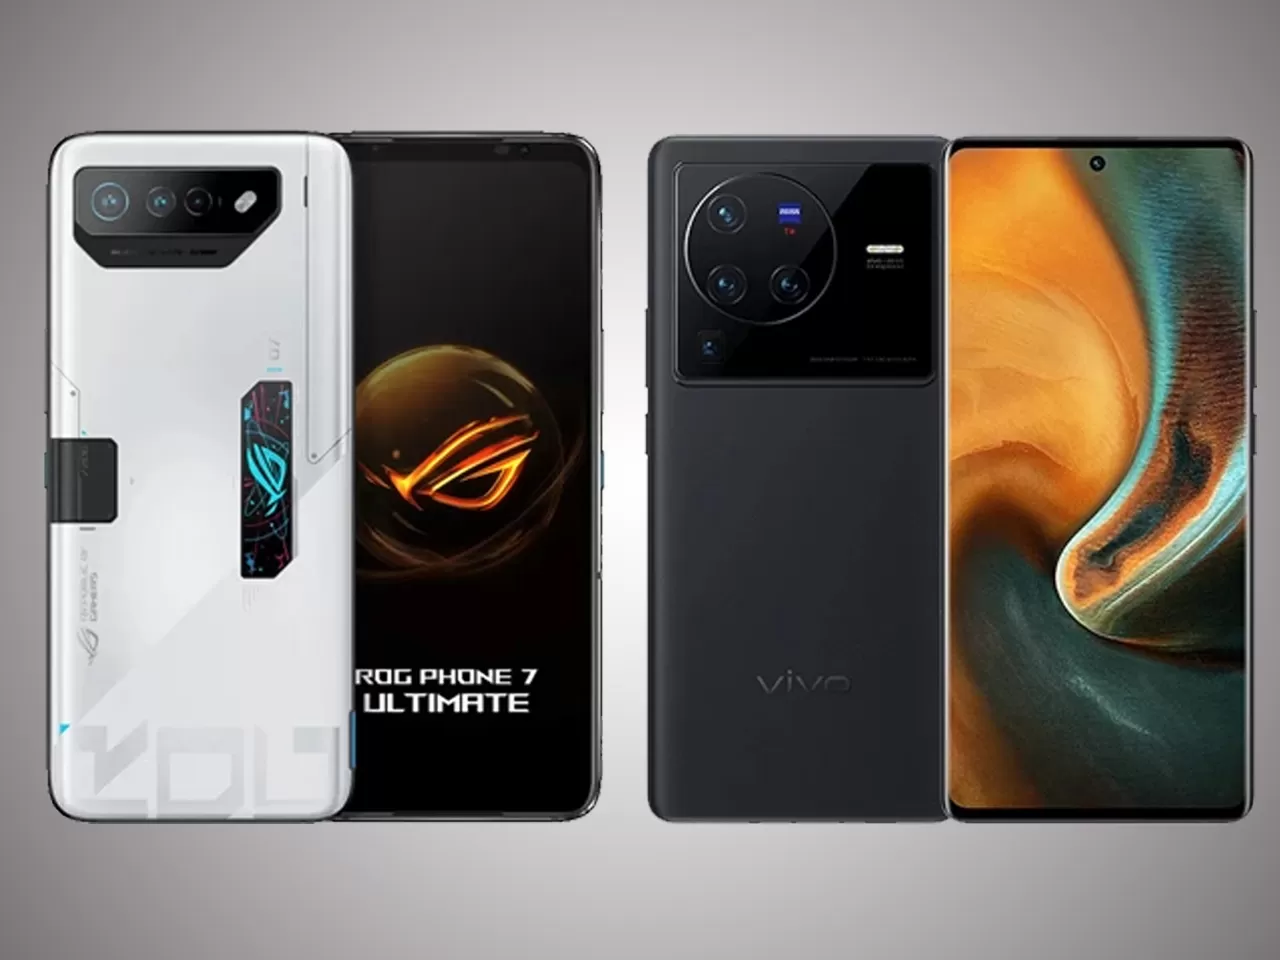  The image shows two gaming phones, the ROG Phone 7 Ultimate and the Vivo iQOO 10 Pro, which are both equipped with the Snapdragon 8 Gen 1 processor, large RAM, a dedicated GPU, and a high-quality screen.